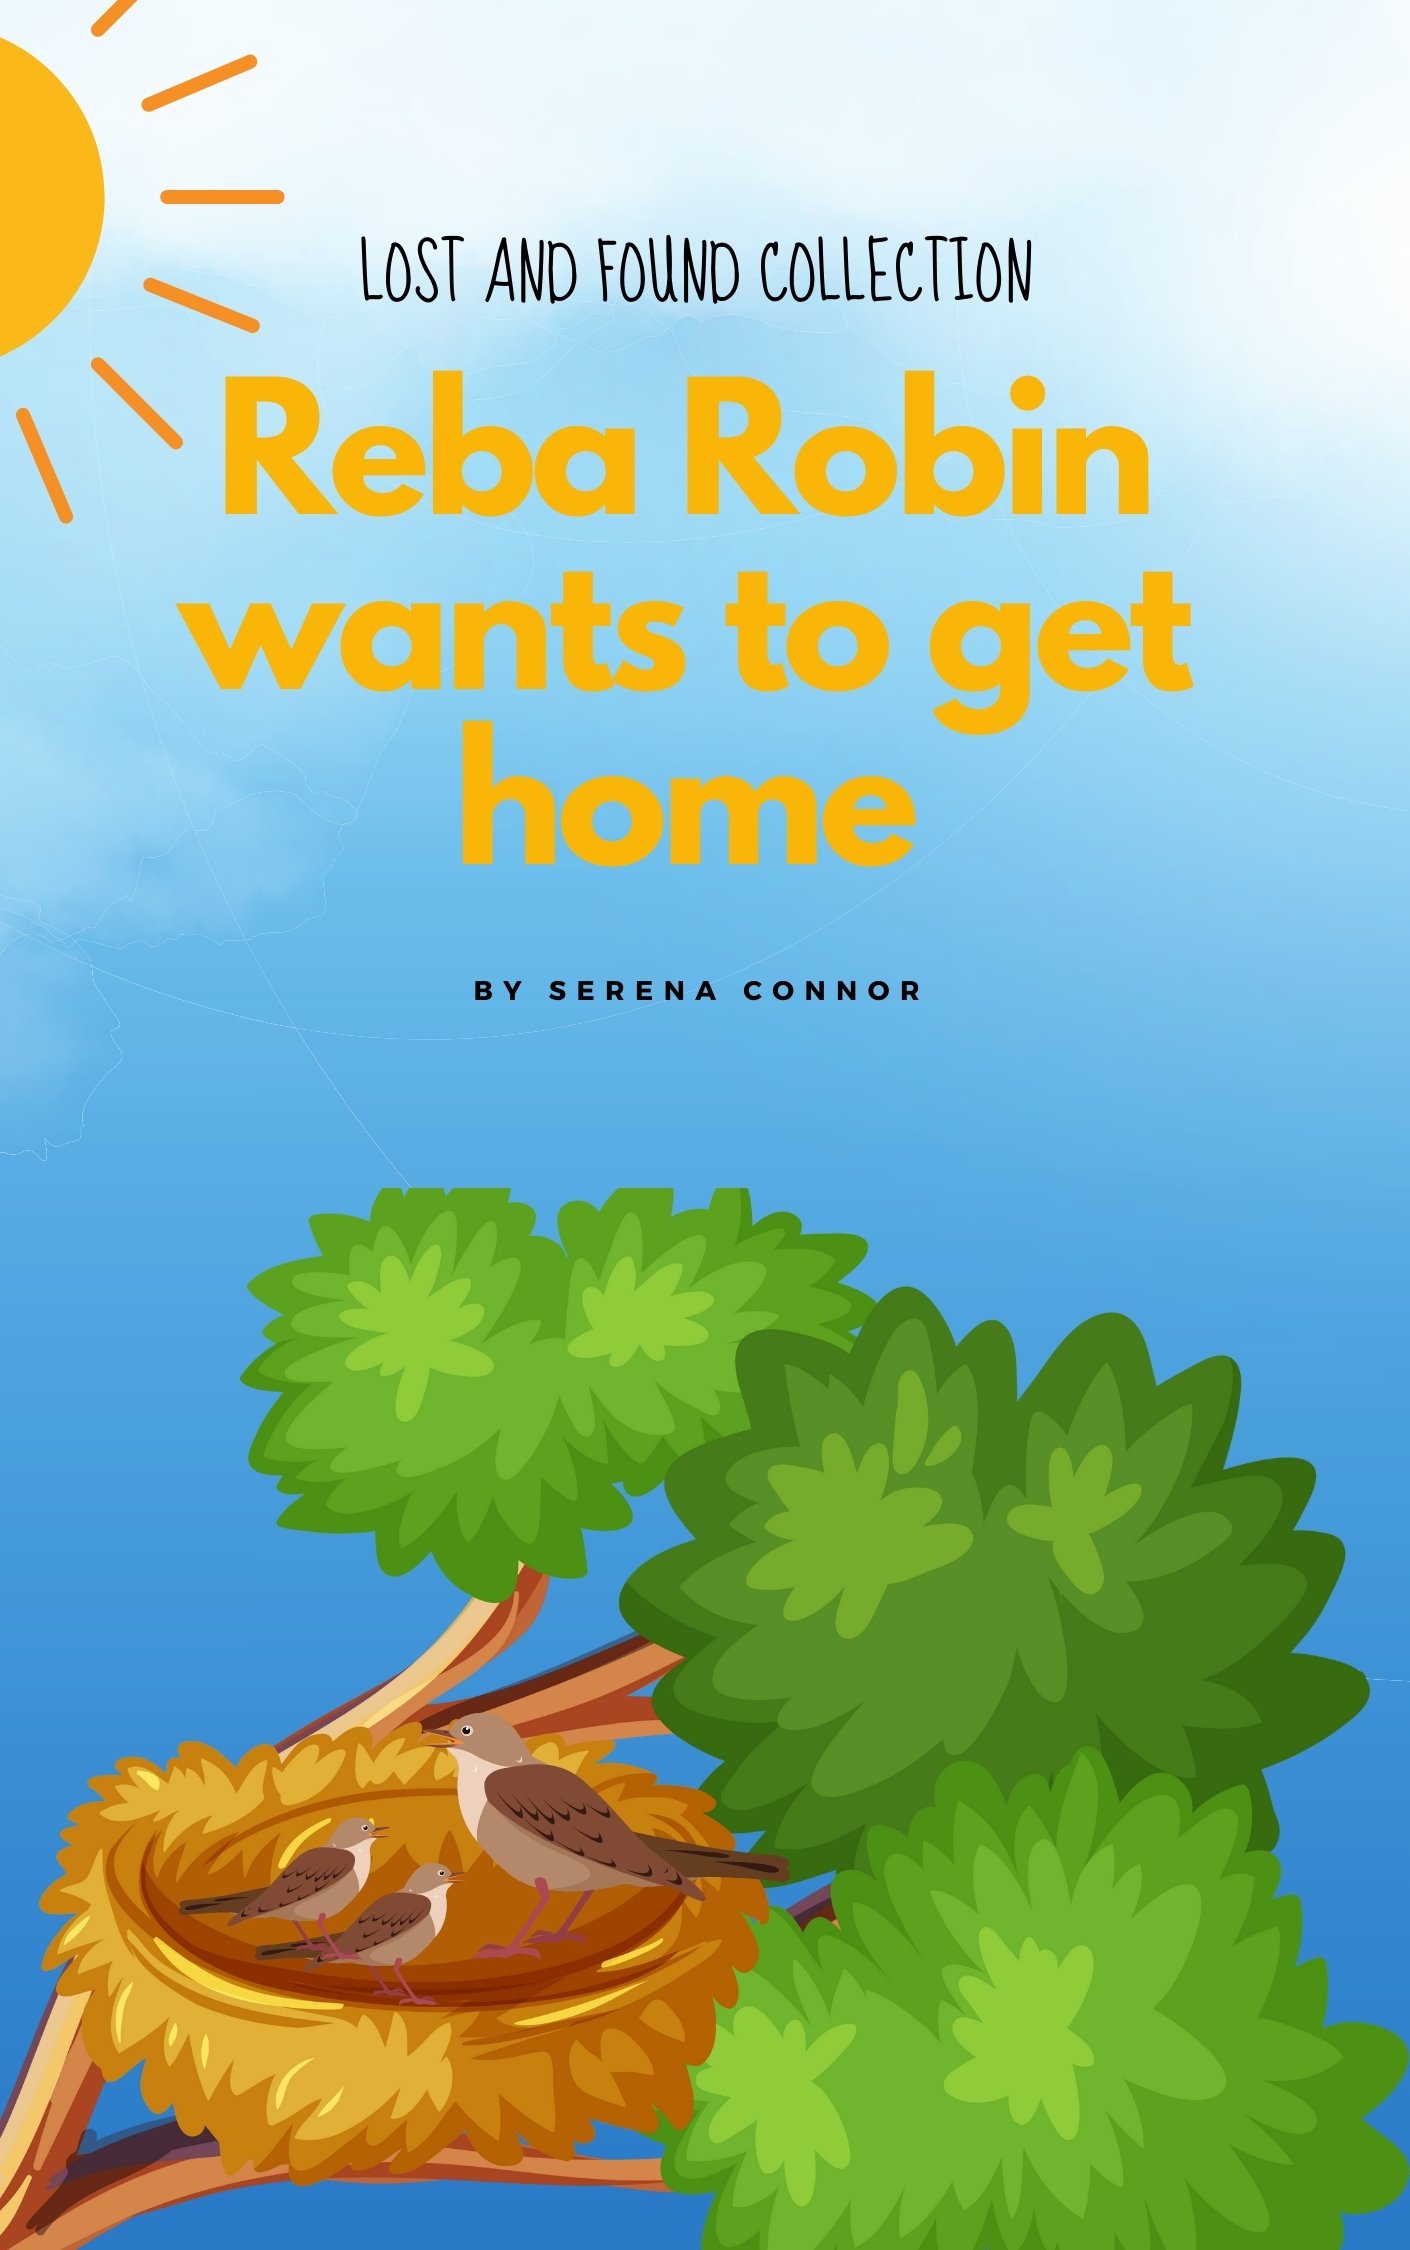 Reba Robin Wants To Get Home by Serena Connor